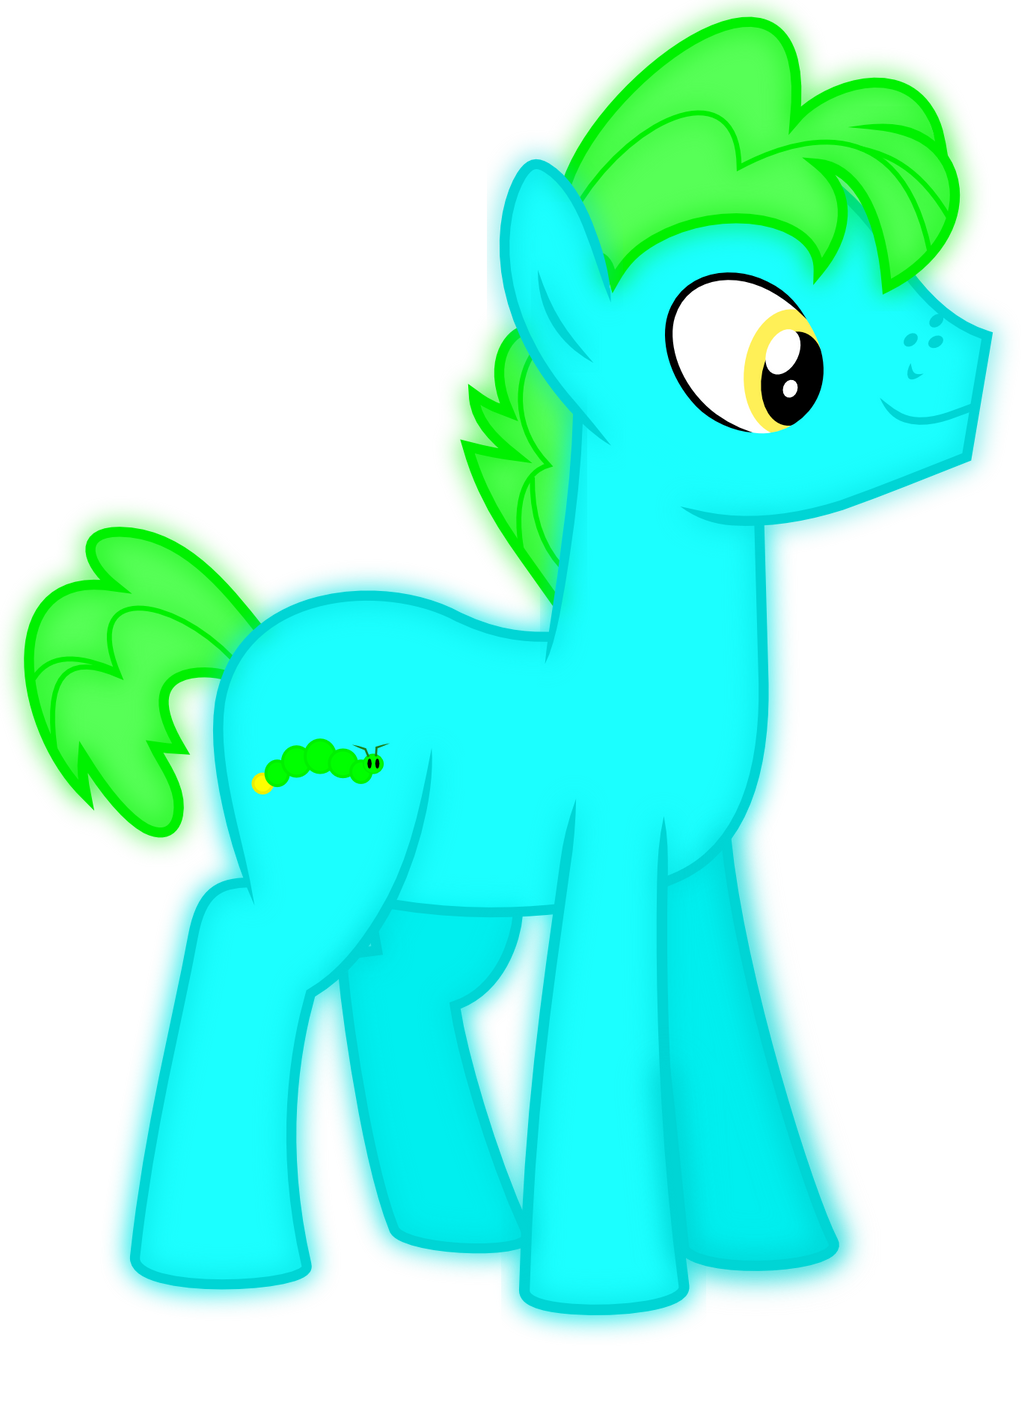 Introducing the Glowstick Empire Ponies: Gloworm